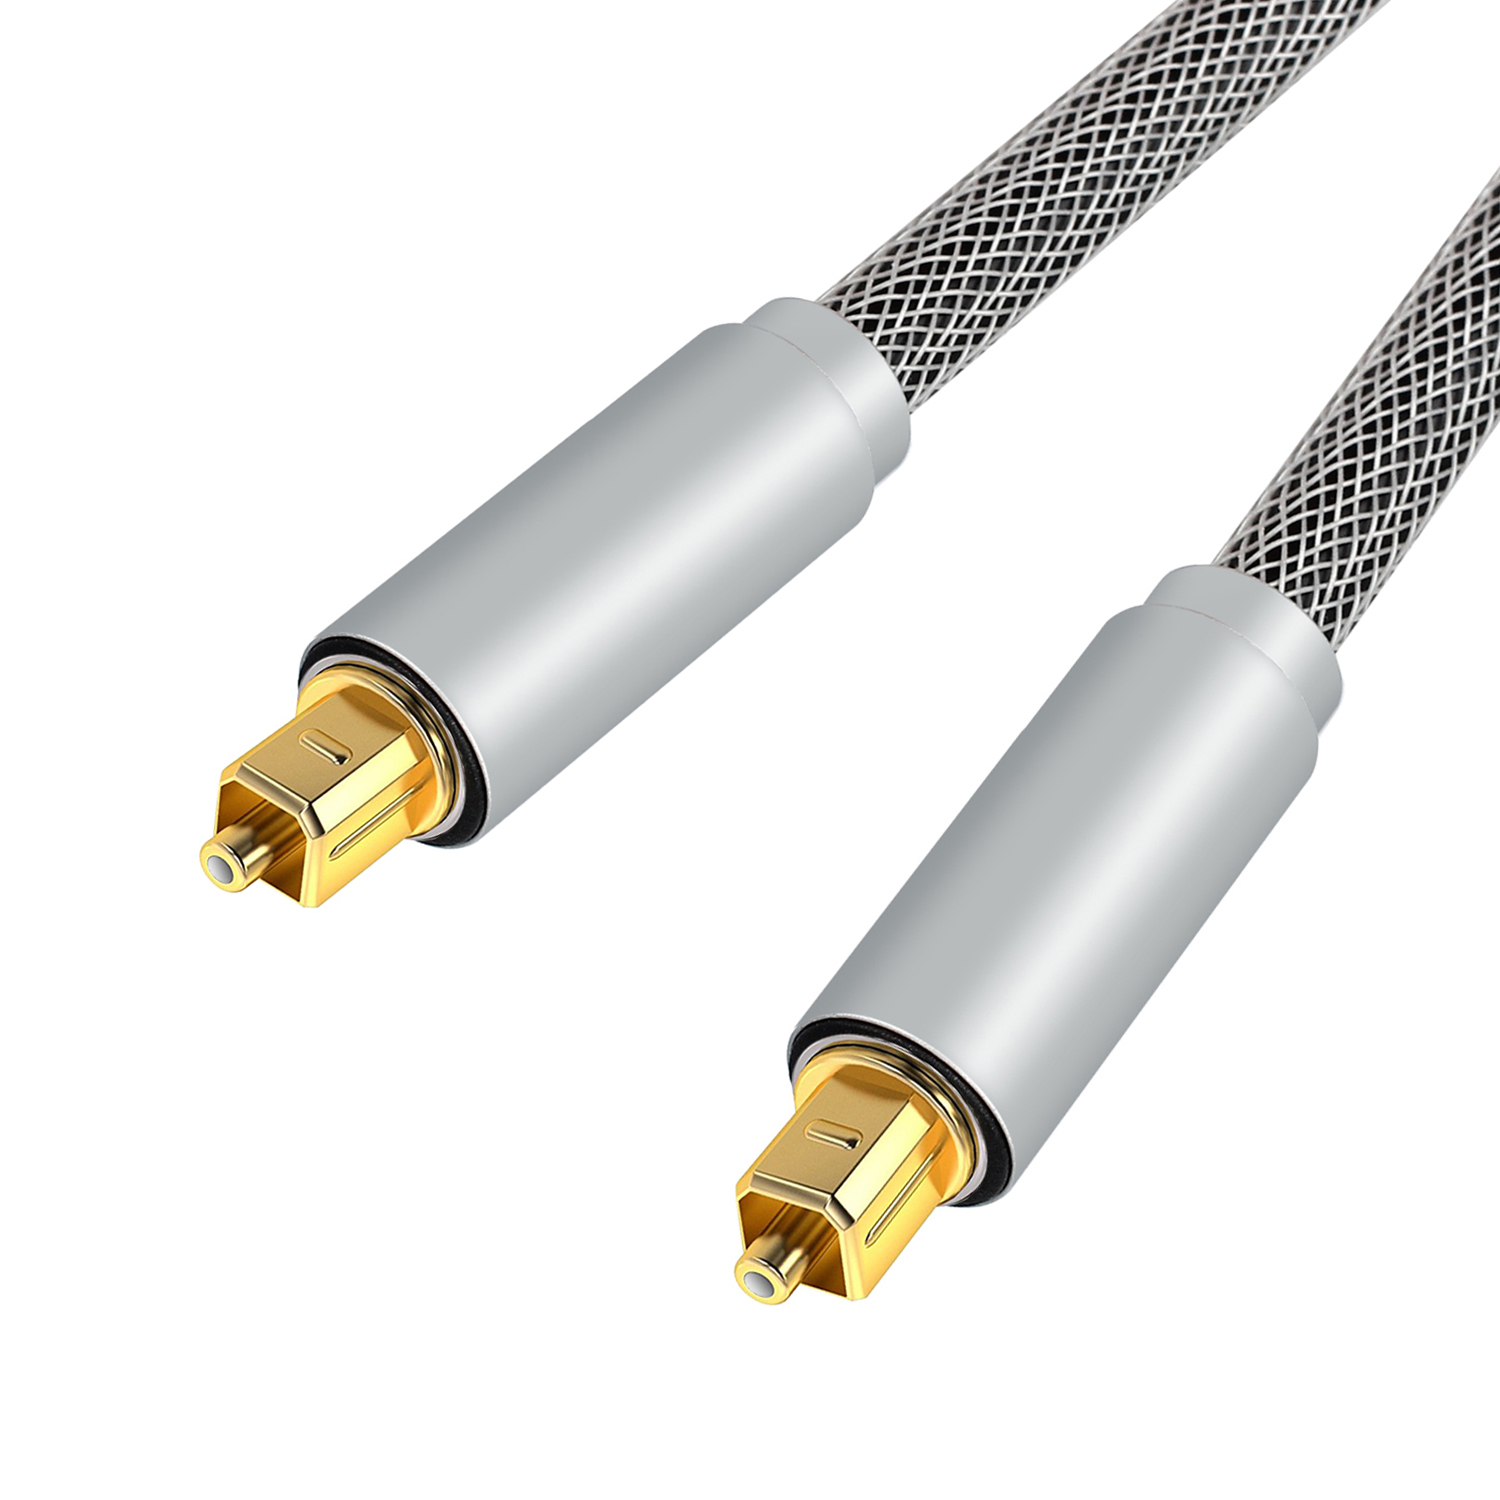 Spdif coaxial to optical cable